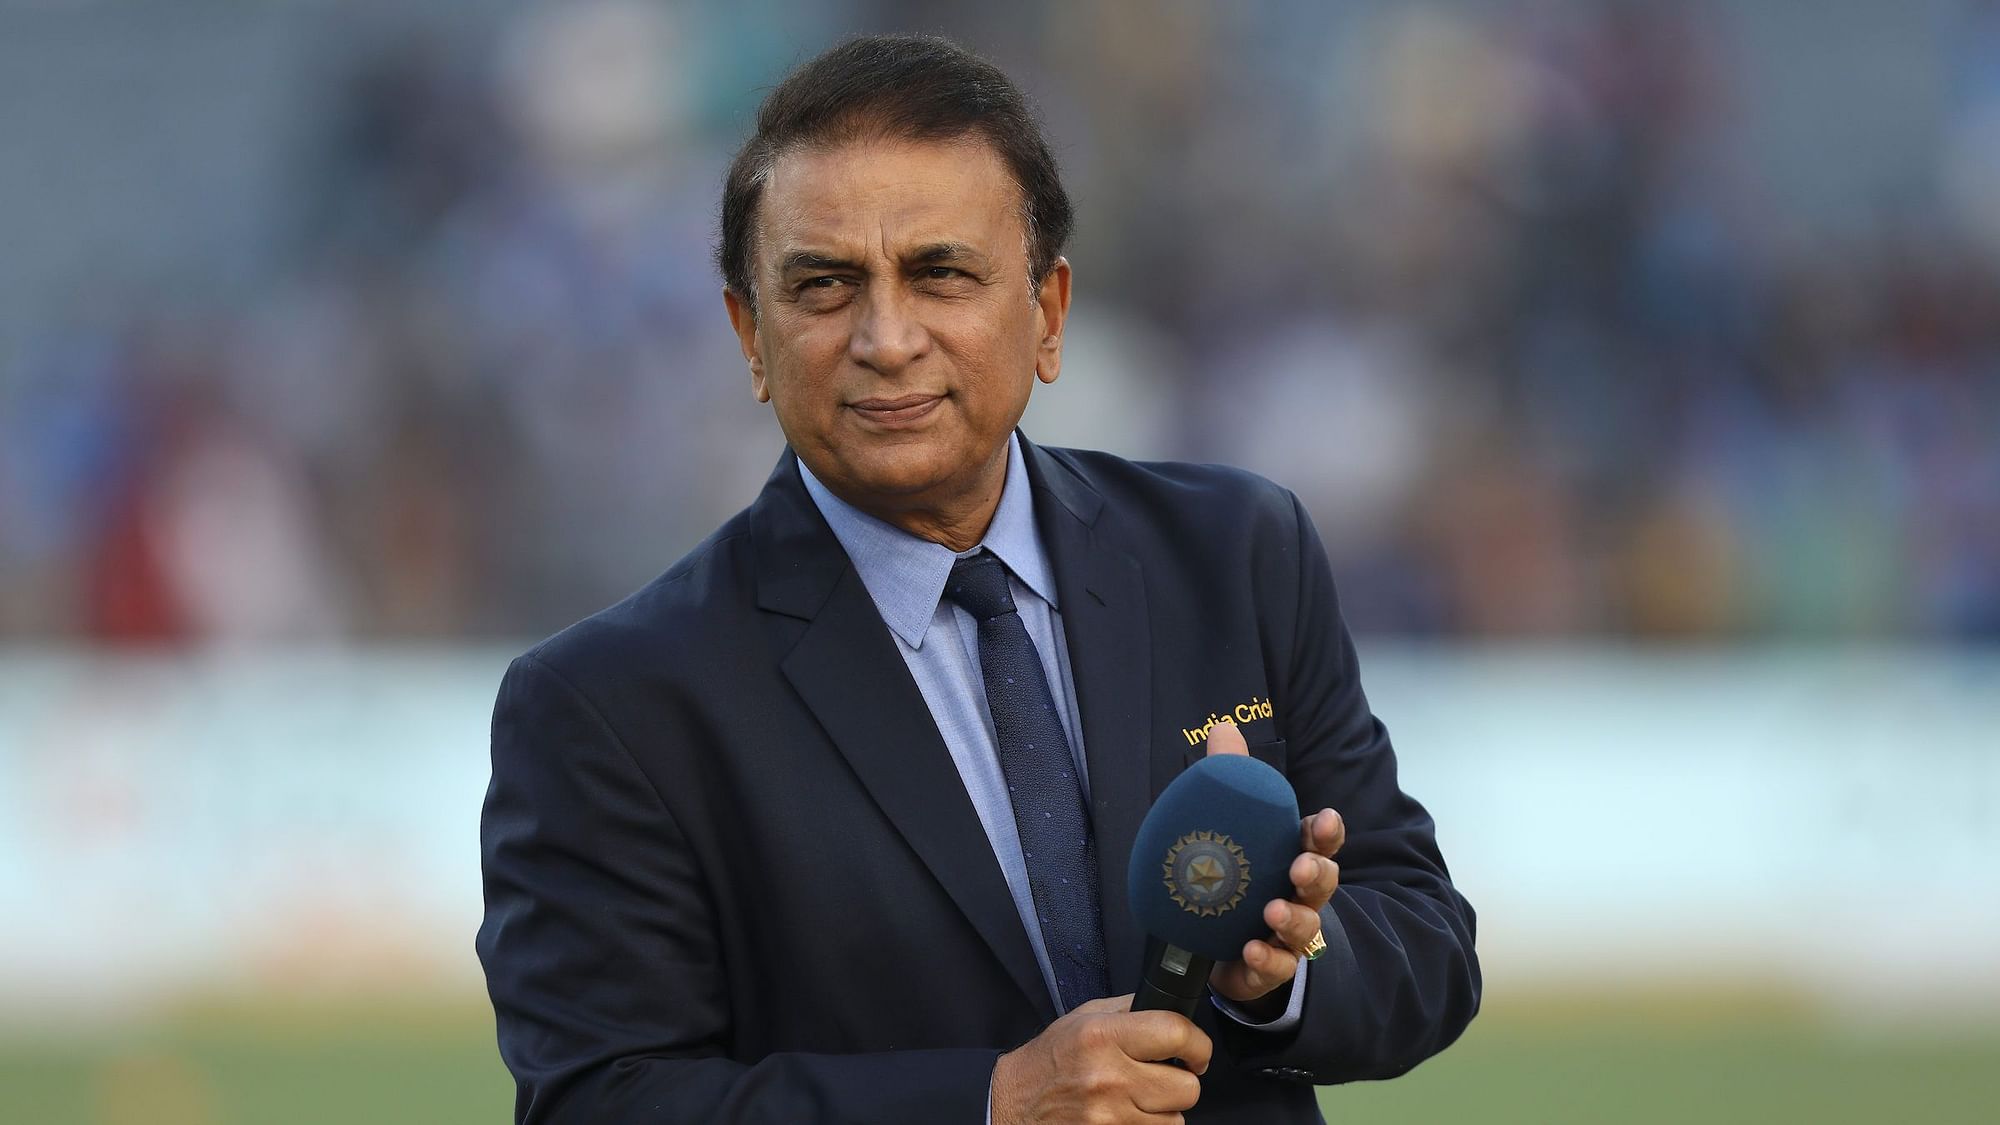 Sunil Gavaskar still does not know why he was removed as captain despite winning a home Test series against the West Indies.